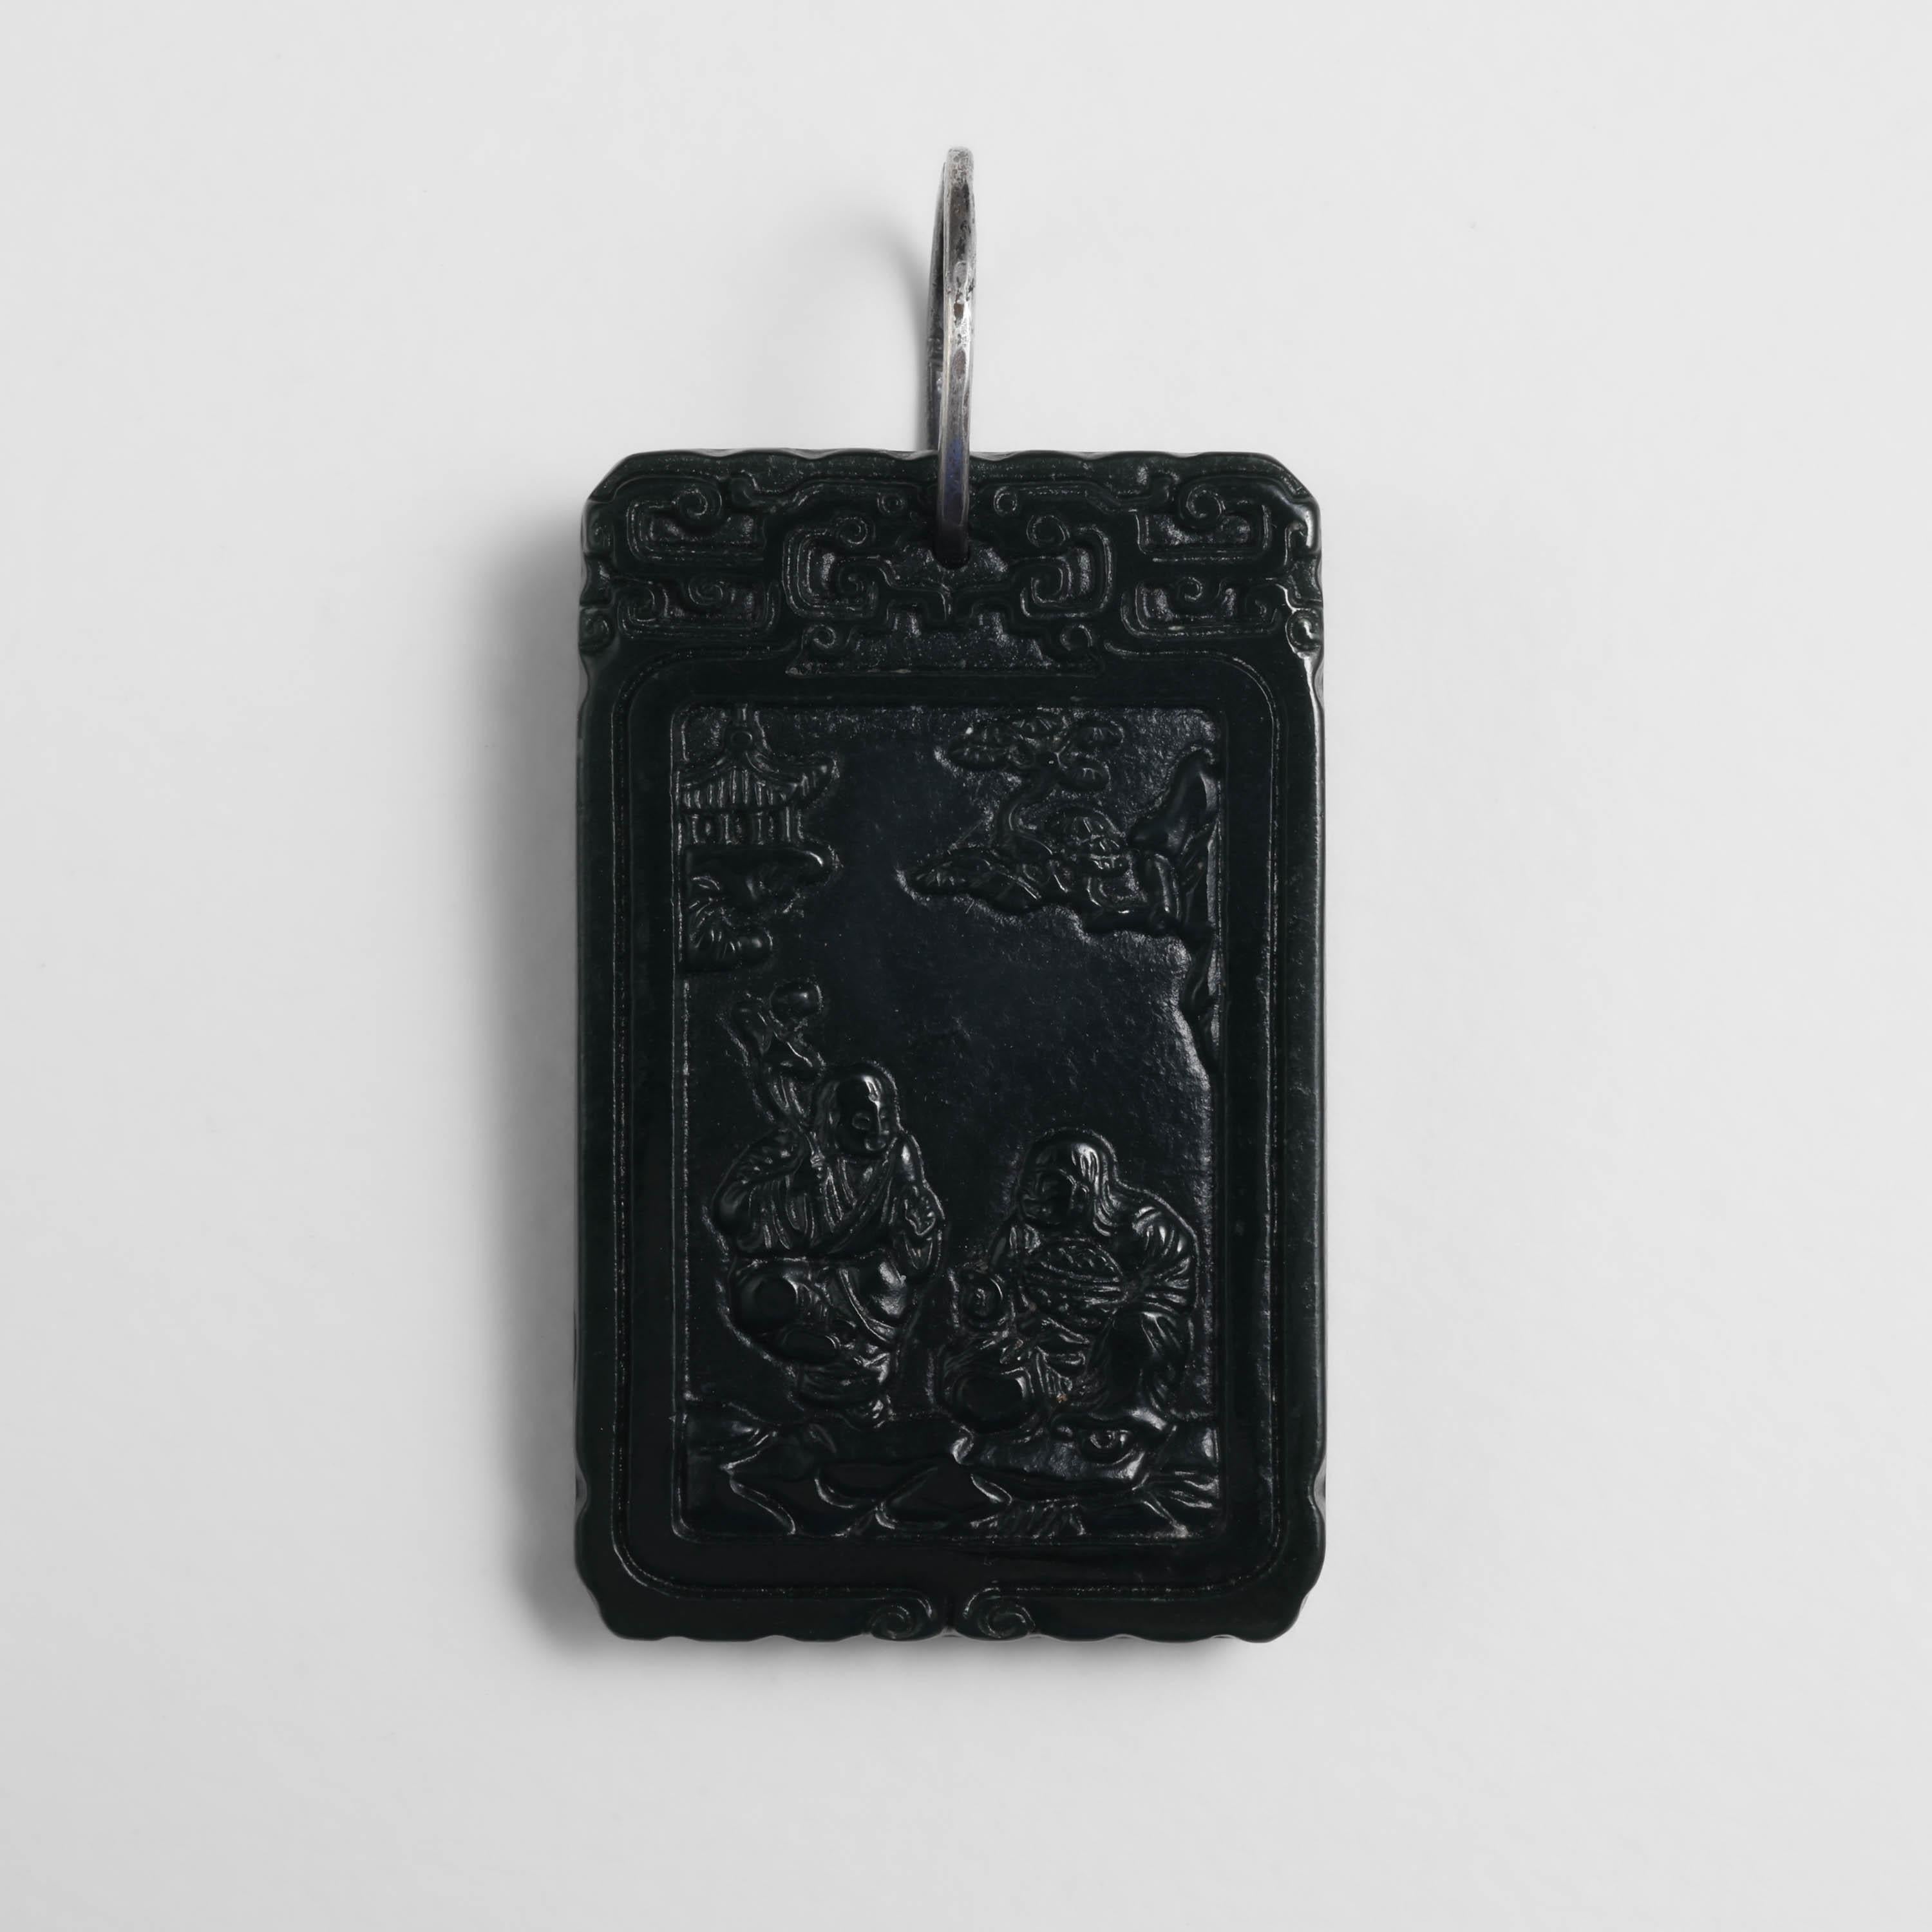 This exquisite and rare black jade tablet dates to the Qing period. 

The Qing Dynasty period spanned the years 1636 -1912. Precisely dating jade artifacts from this era is an imprecise science. Part of the reason for this is because lapidary